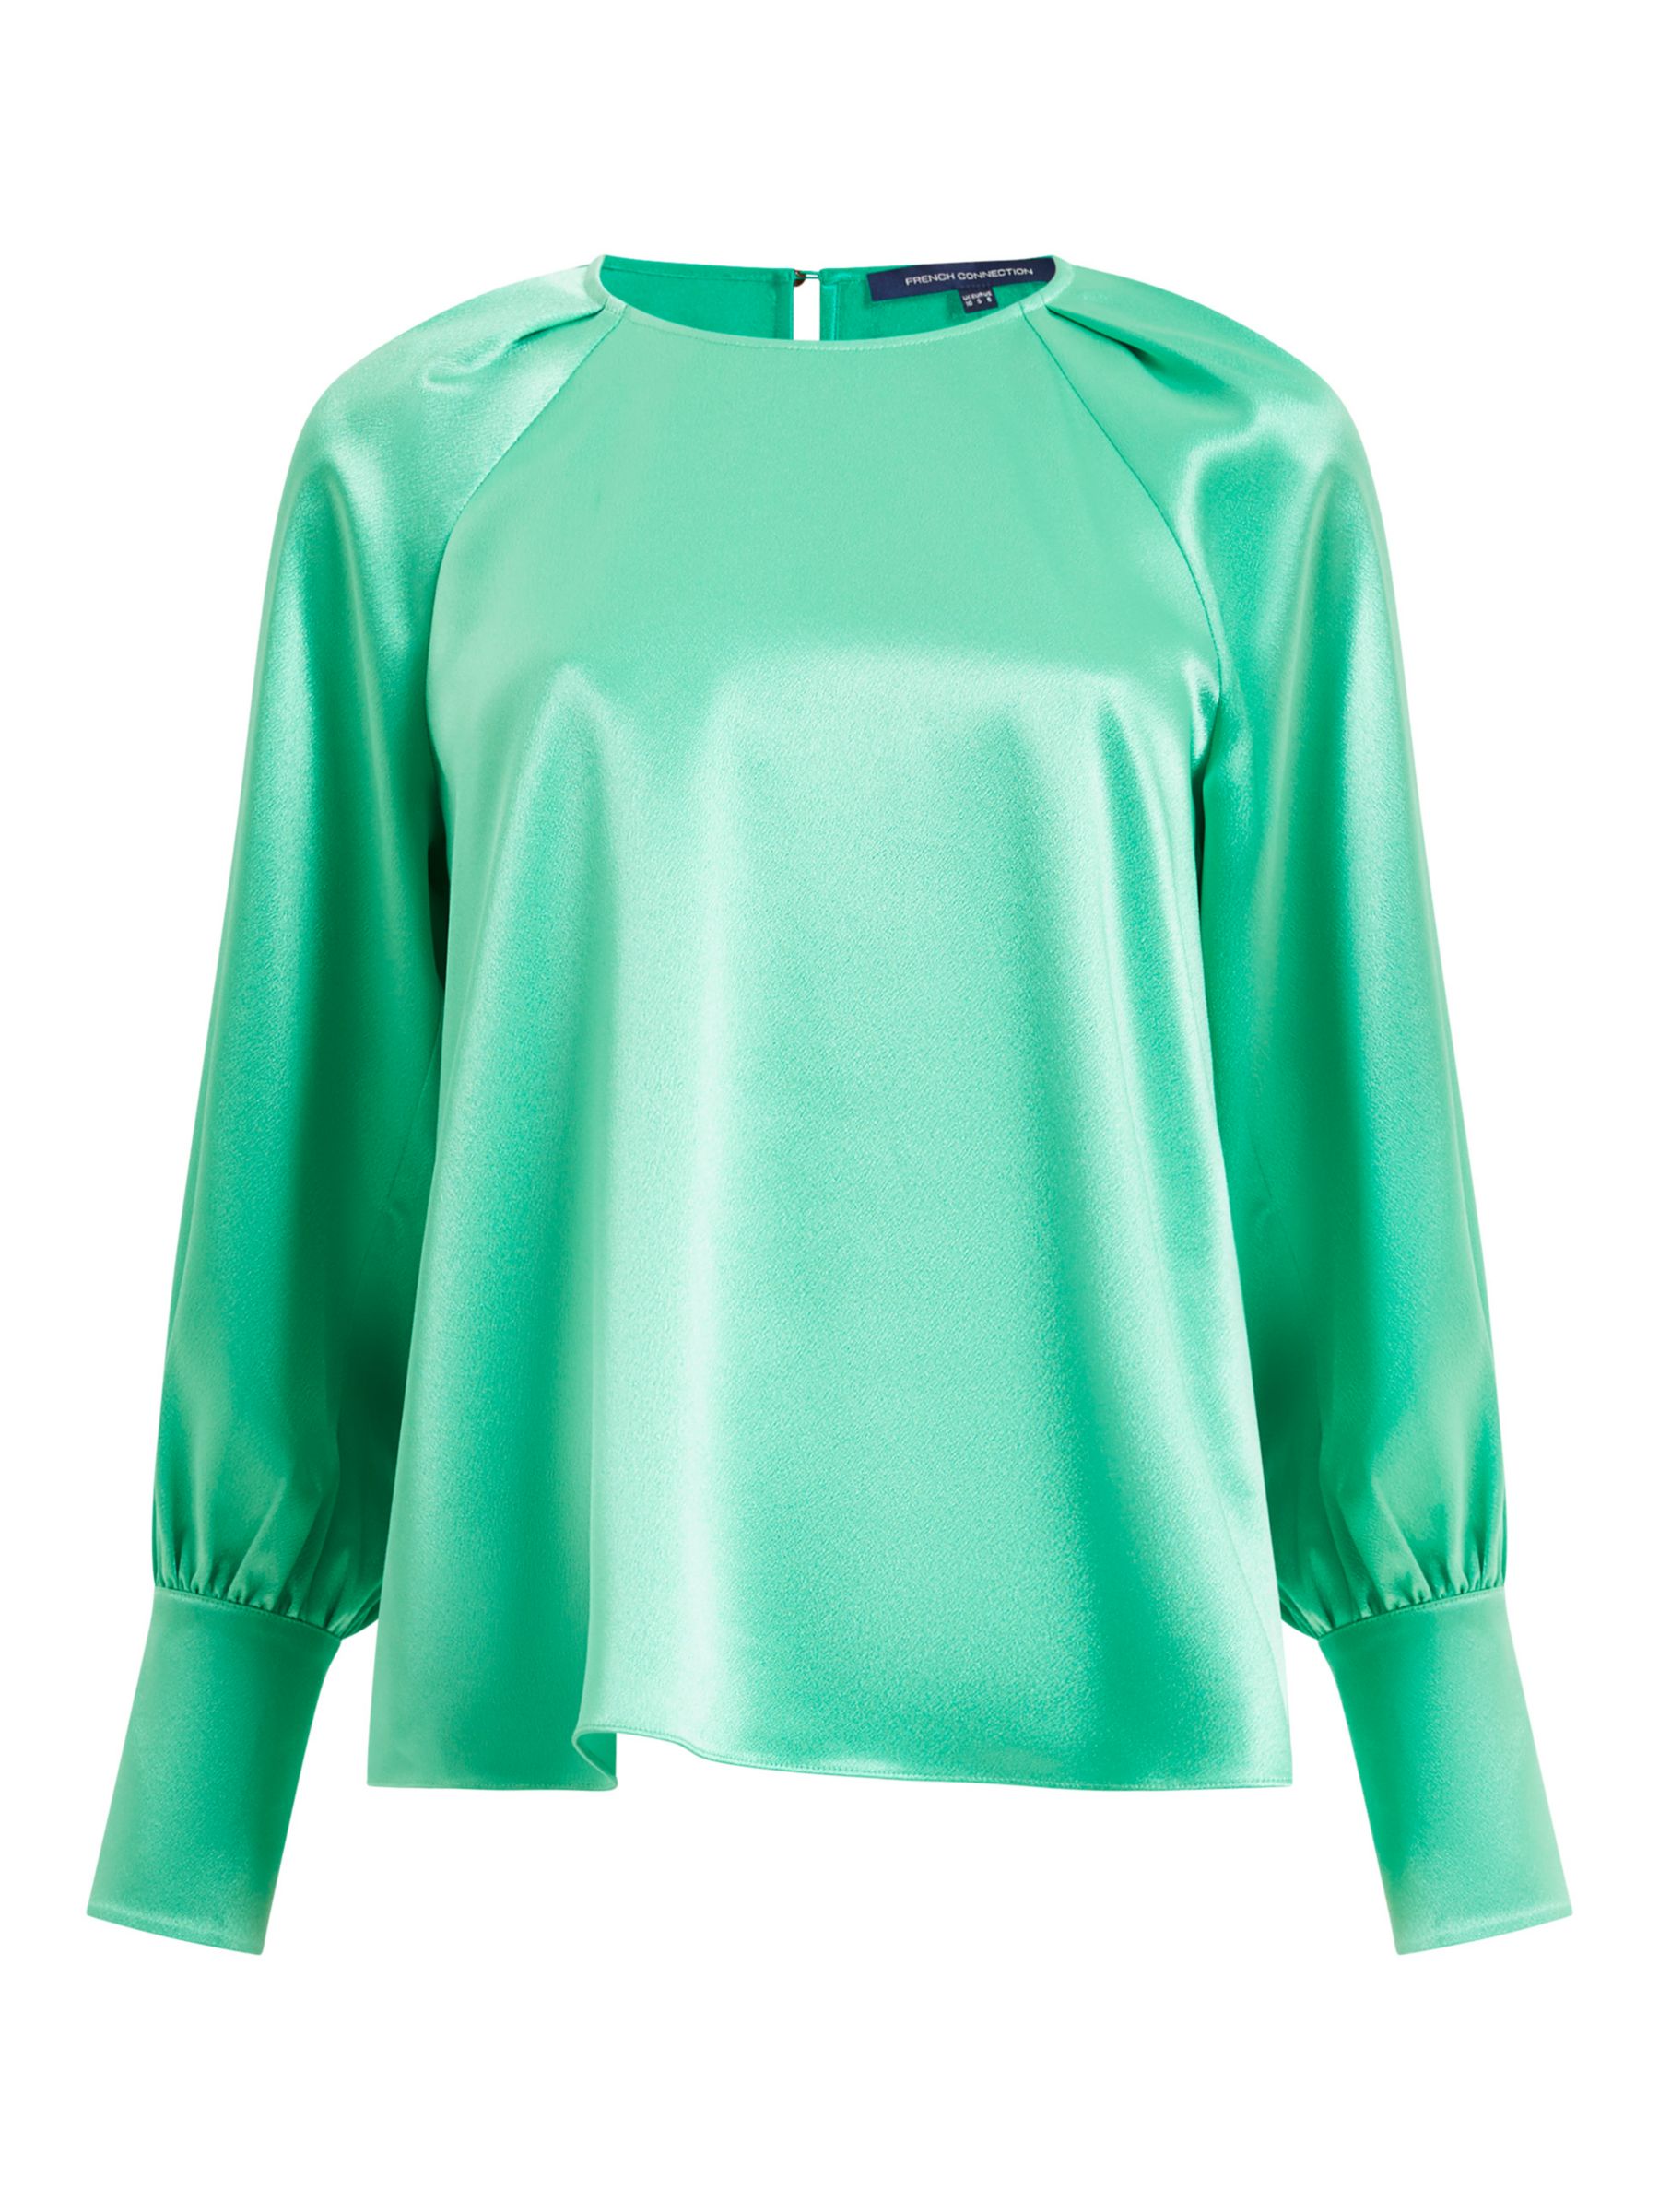 Buy French Connection Adora Satin Top, Green Mineral Online at johnlewis.com